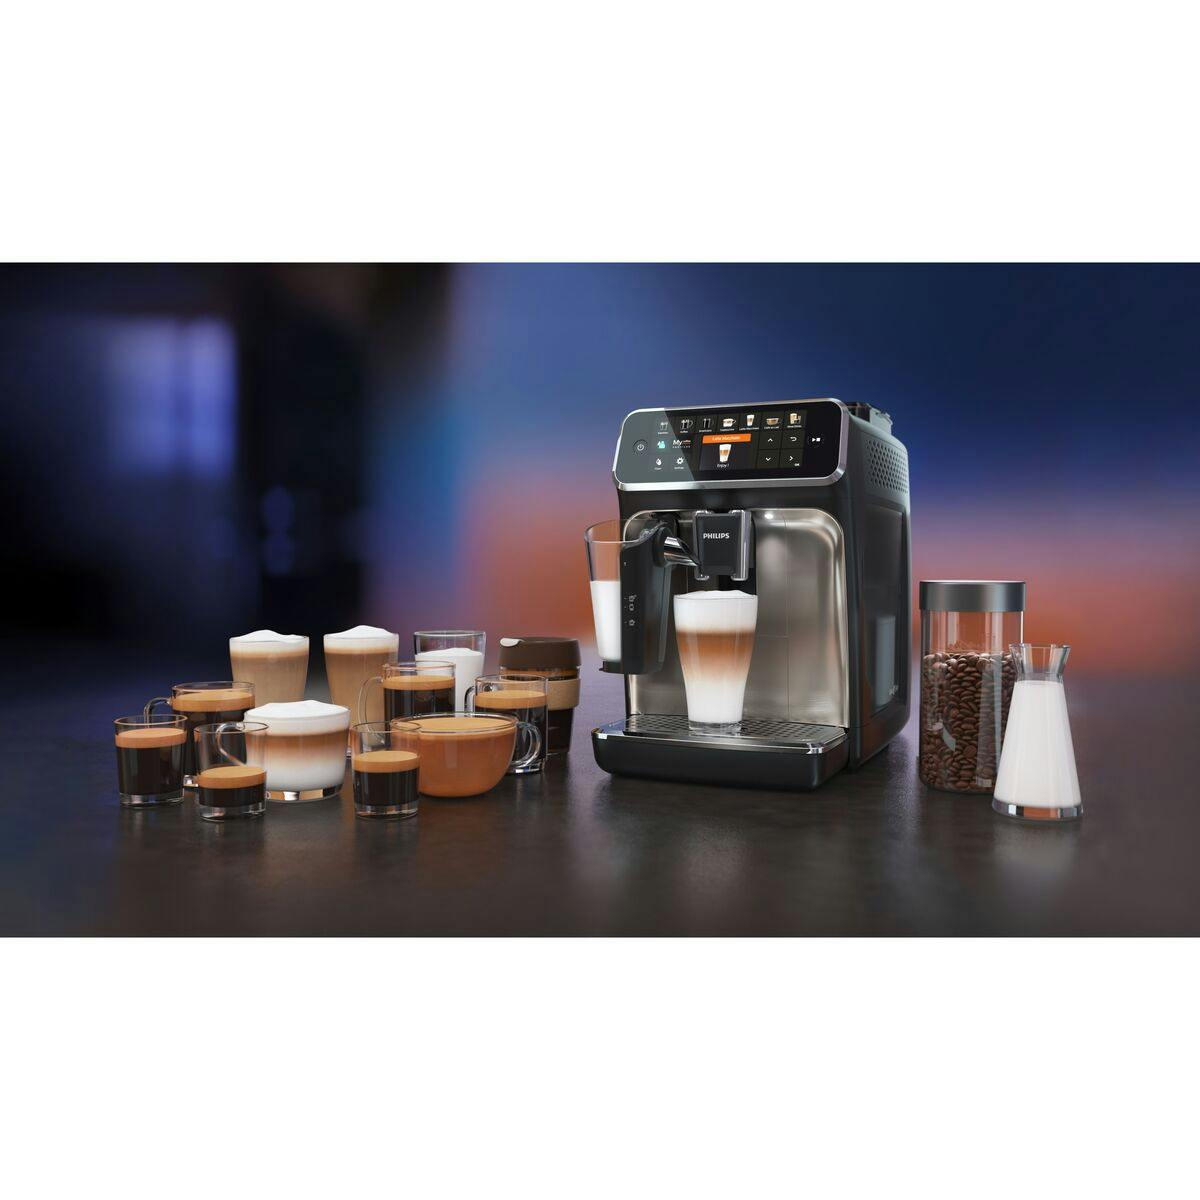 Philips 5400 Fully Automatic Espresso Machine With Lattego